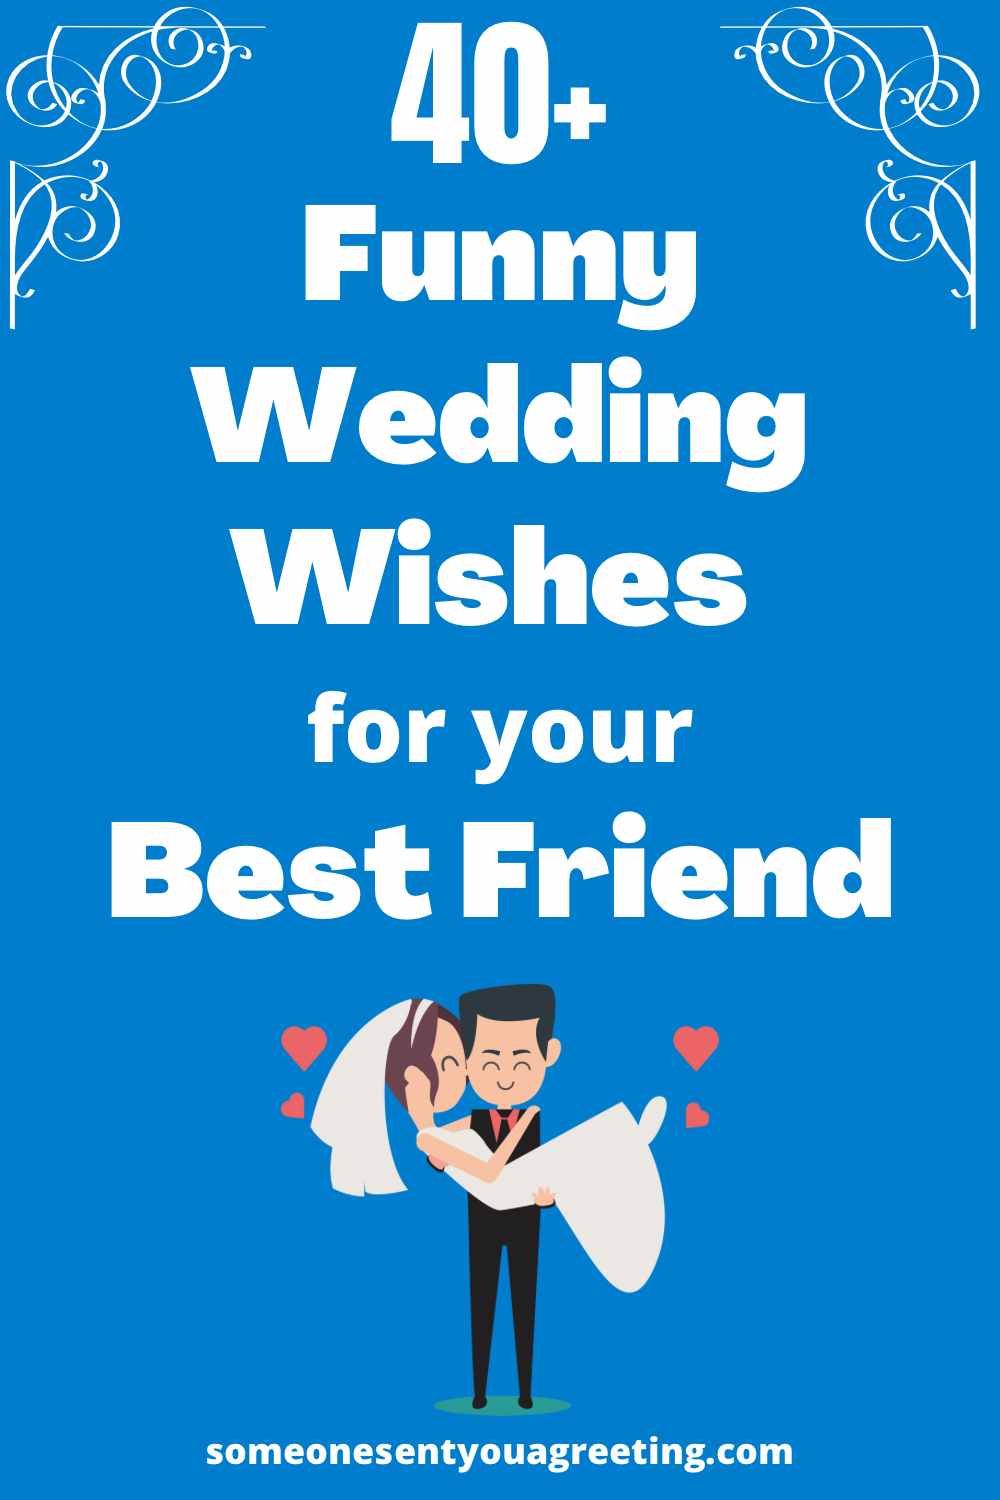 Funny Wedding Messages for Friends, Marriage Wishes